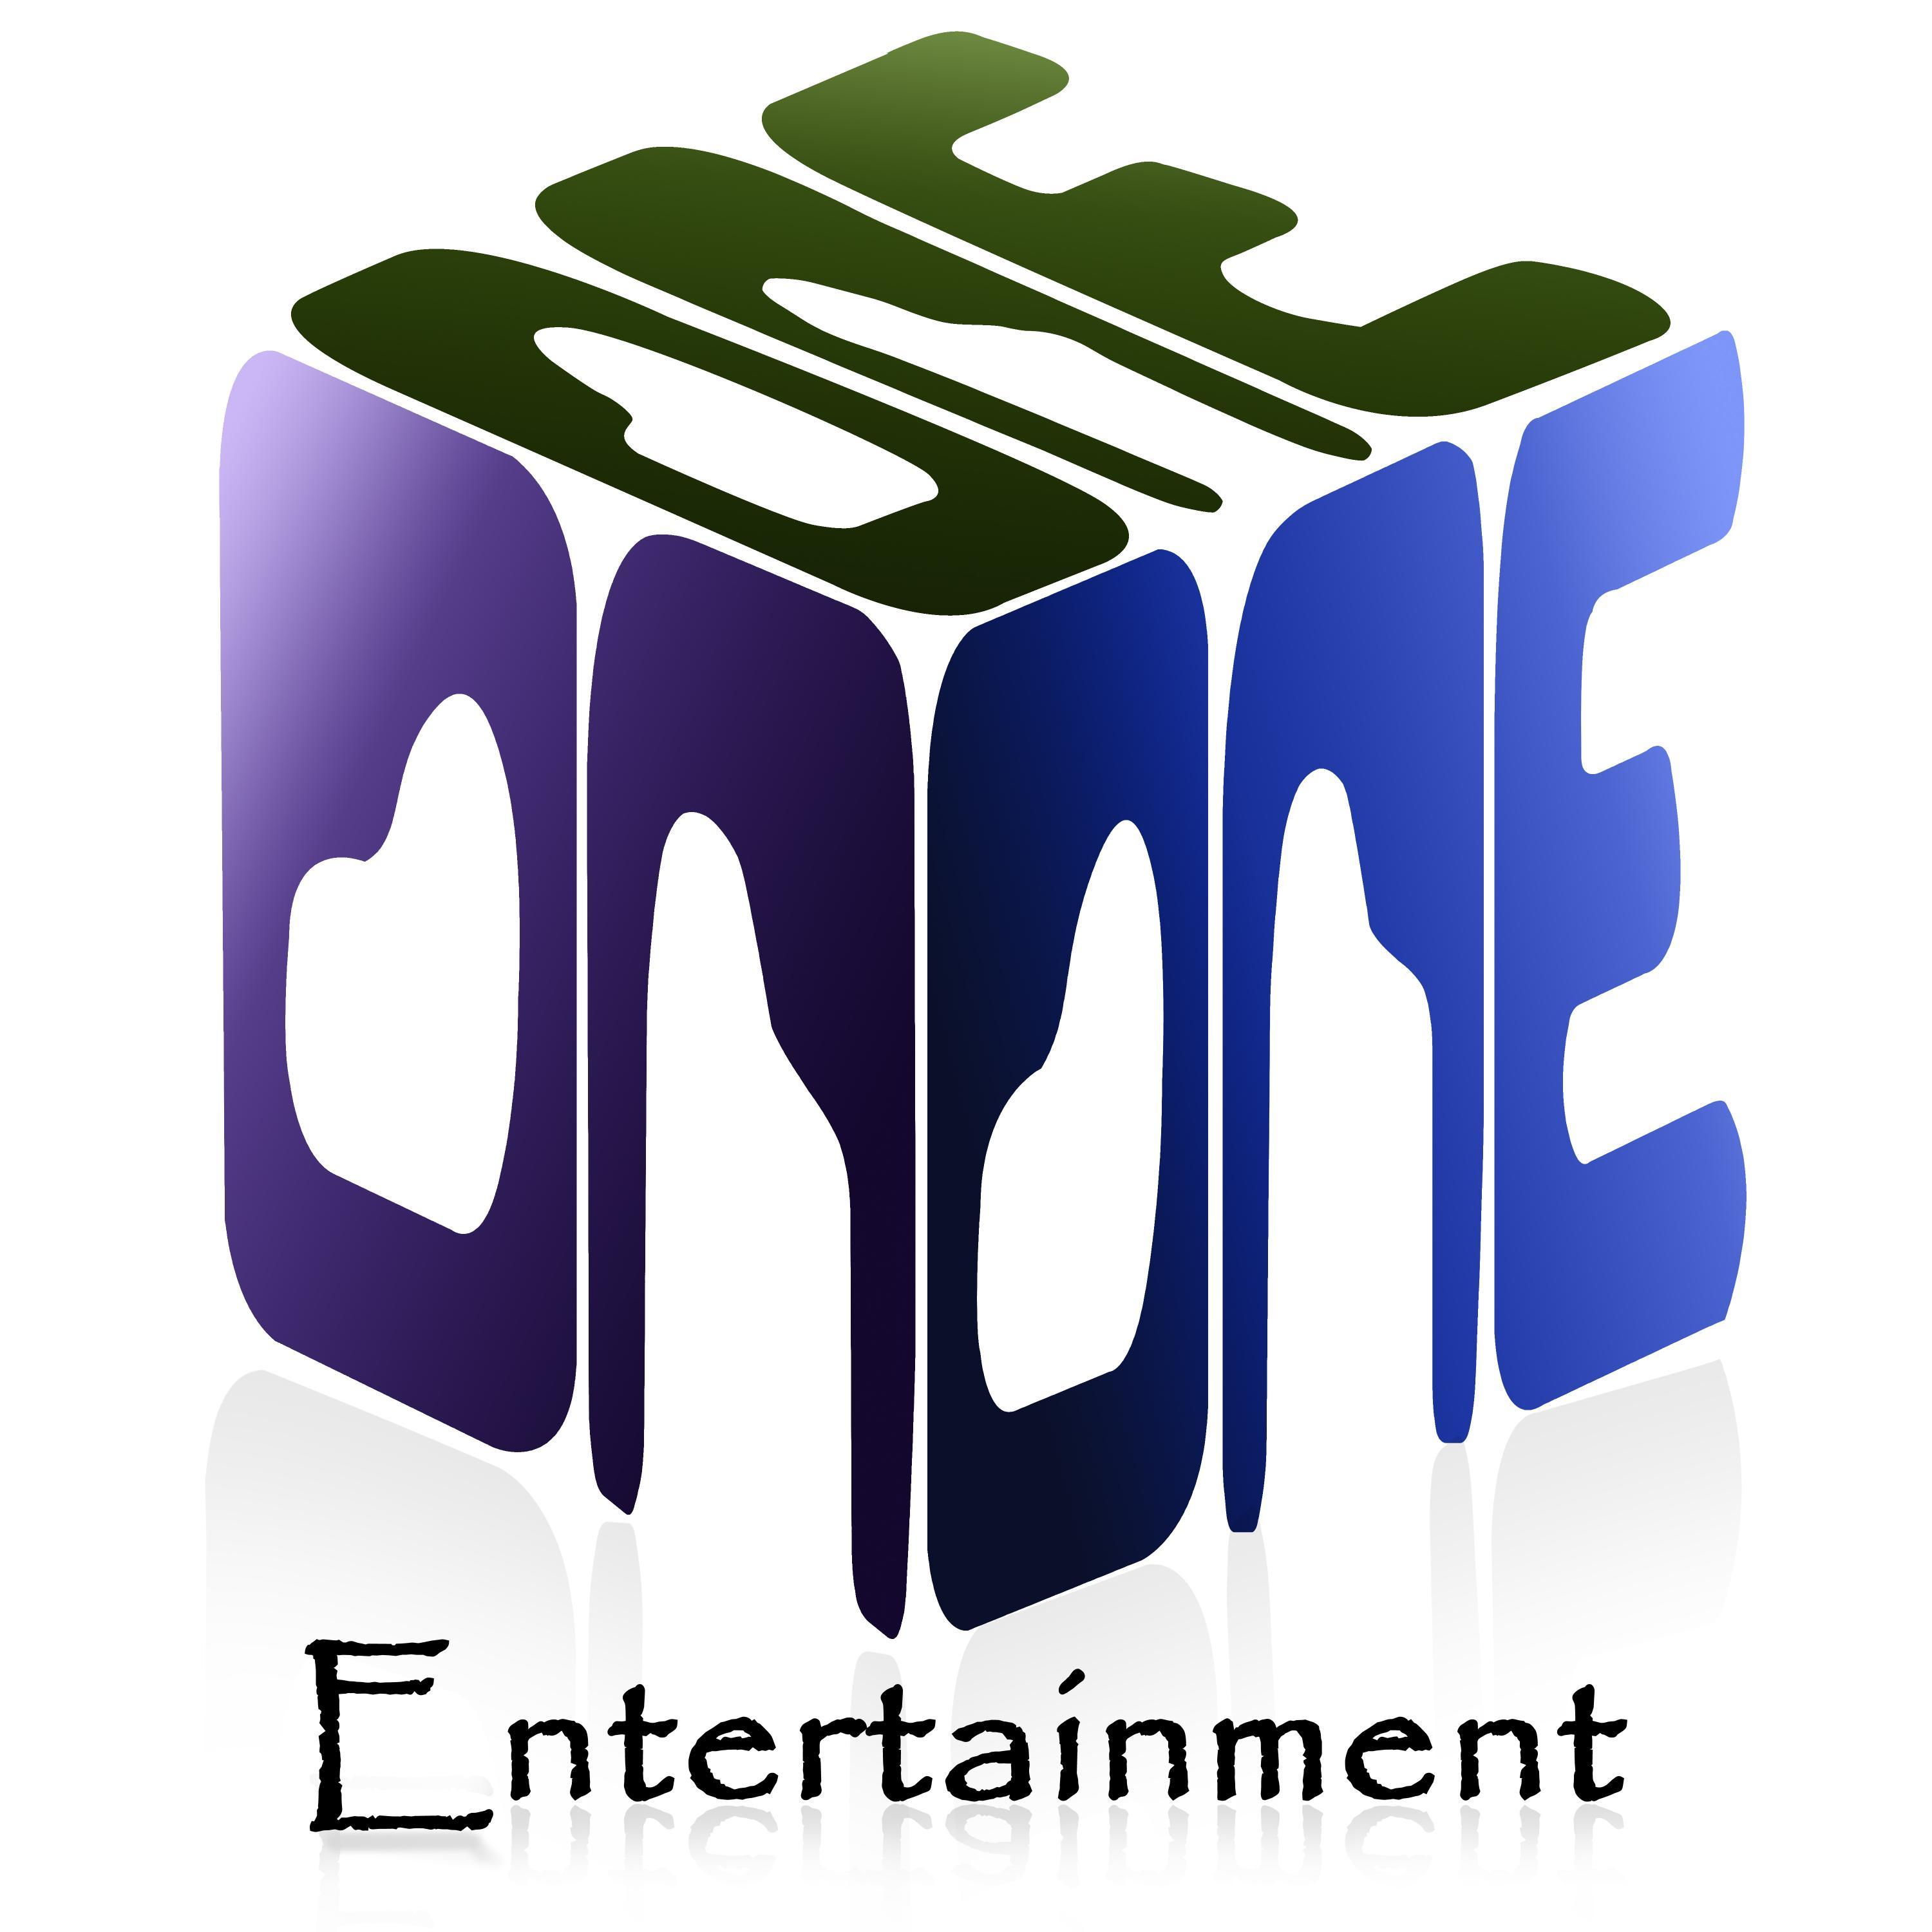 One on One Entertainment is all about Media & Entertainment Production https://t.co/htL8CHE94p. It was established in 2012.😊